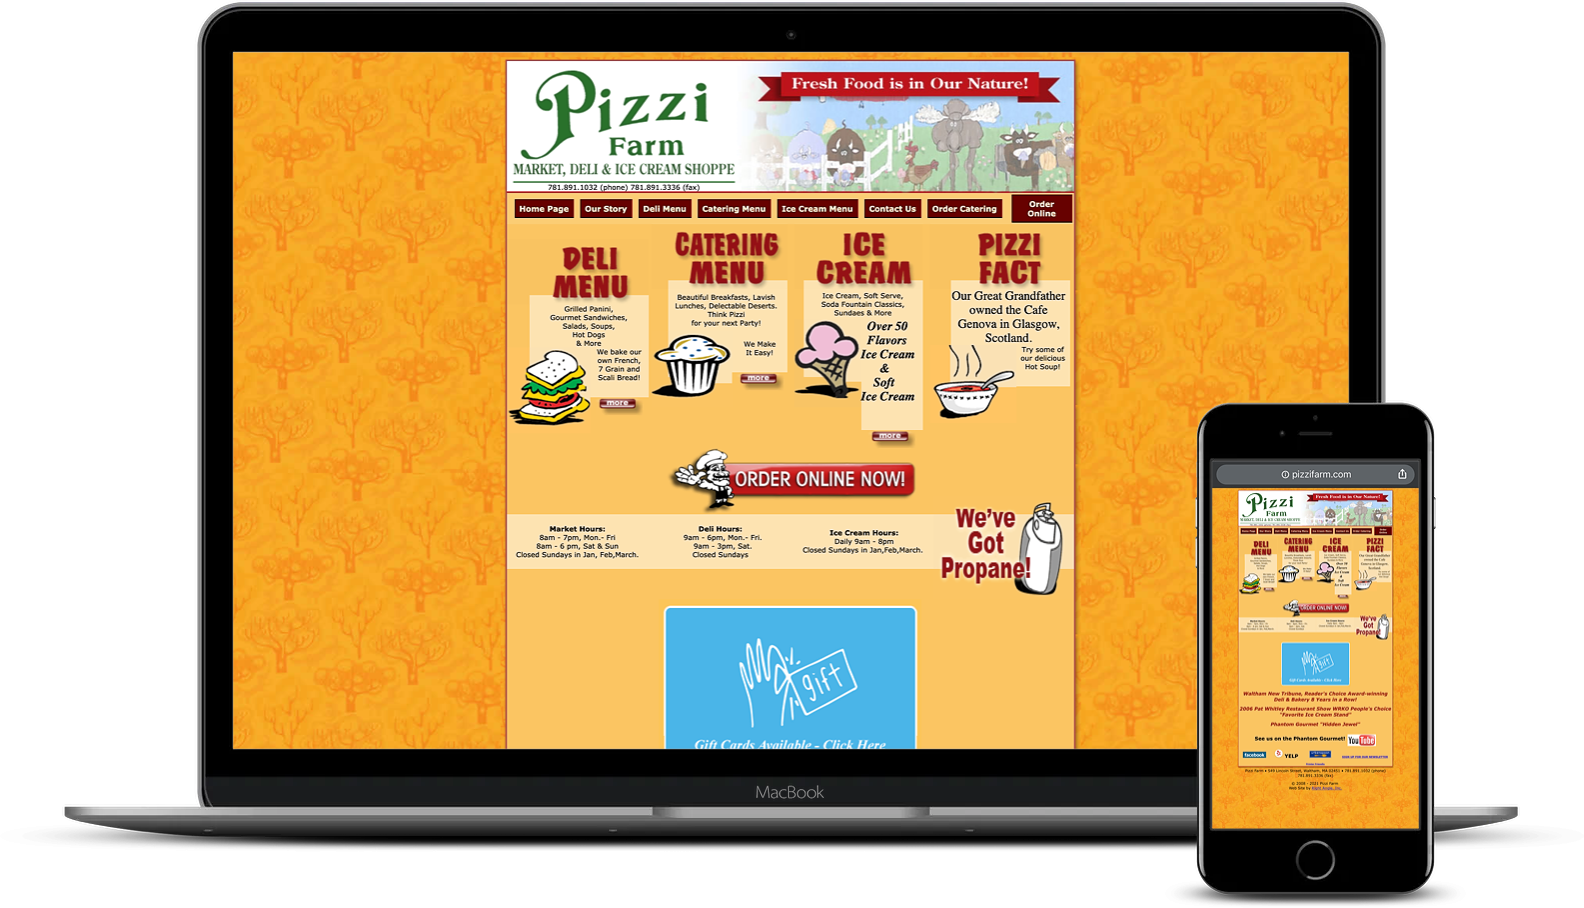 pizzi farm BEFORE website.png